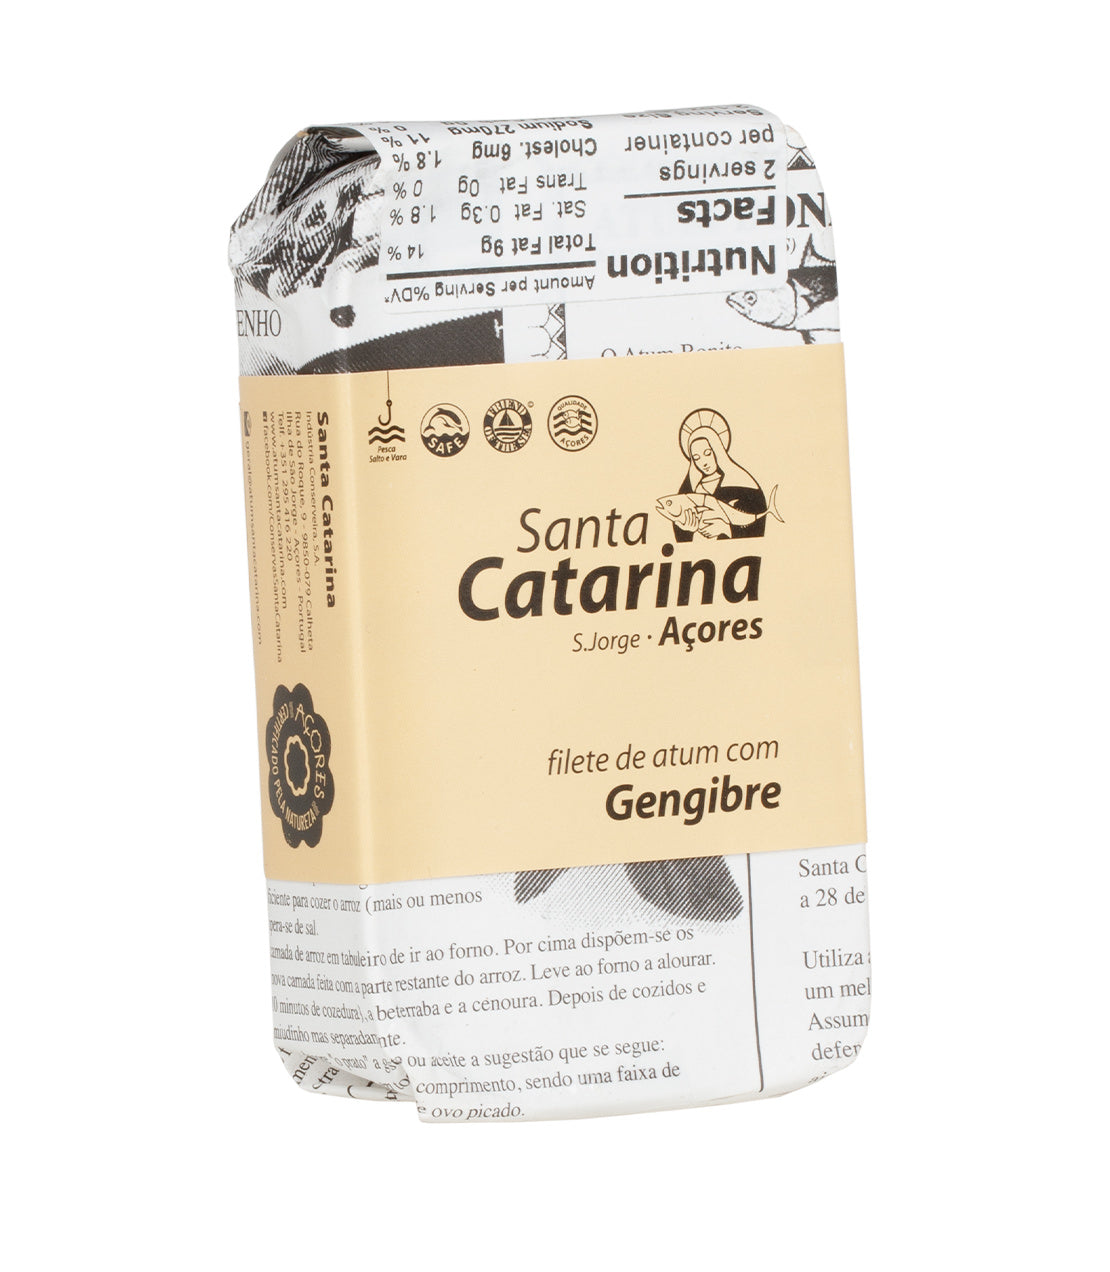 Portugalia Market Canned Fish (Assorted Flavors) - 4.4 oz. Can Santa Catarina Gourmet Tuna Fillets with Ginger - Harney & Sons Fine Teas